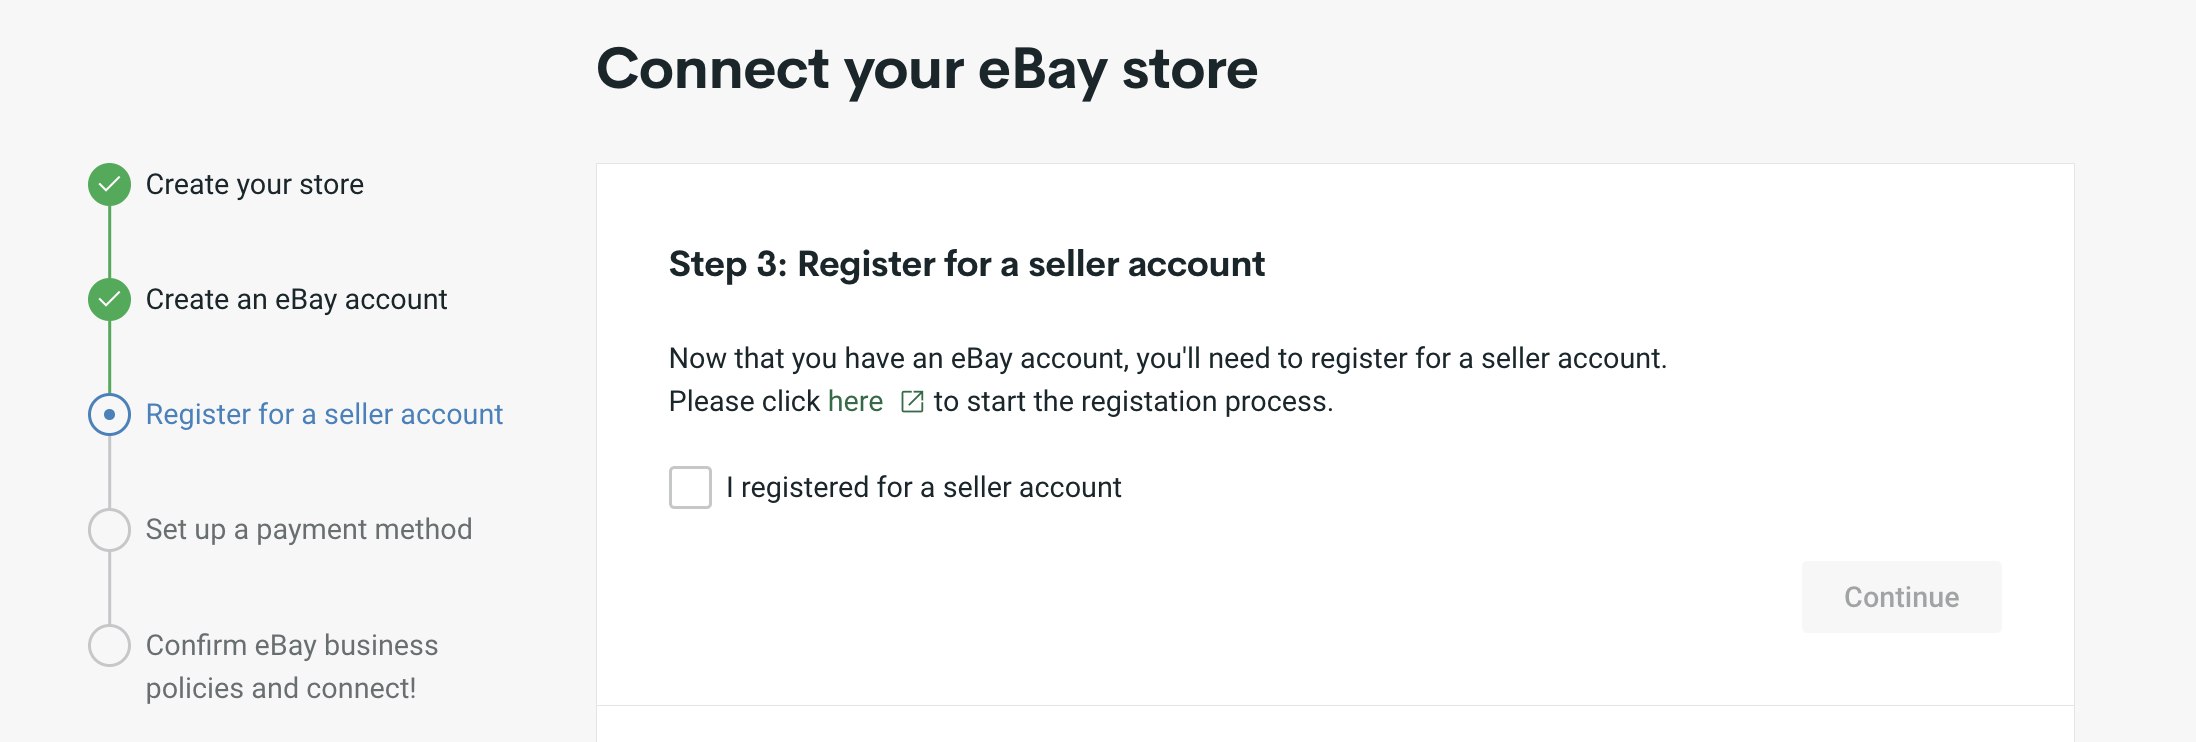 connect-ebay-4.png